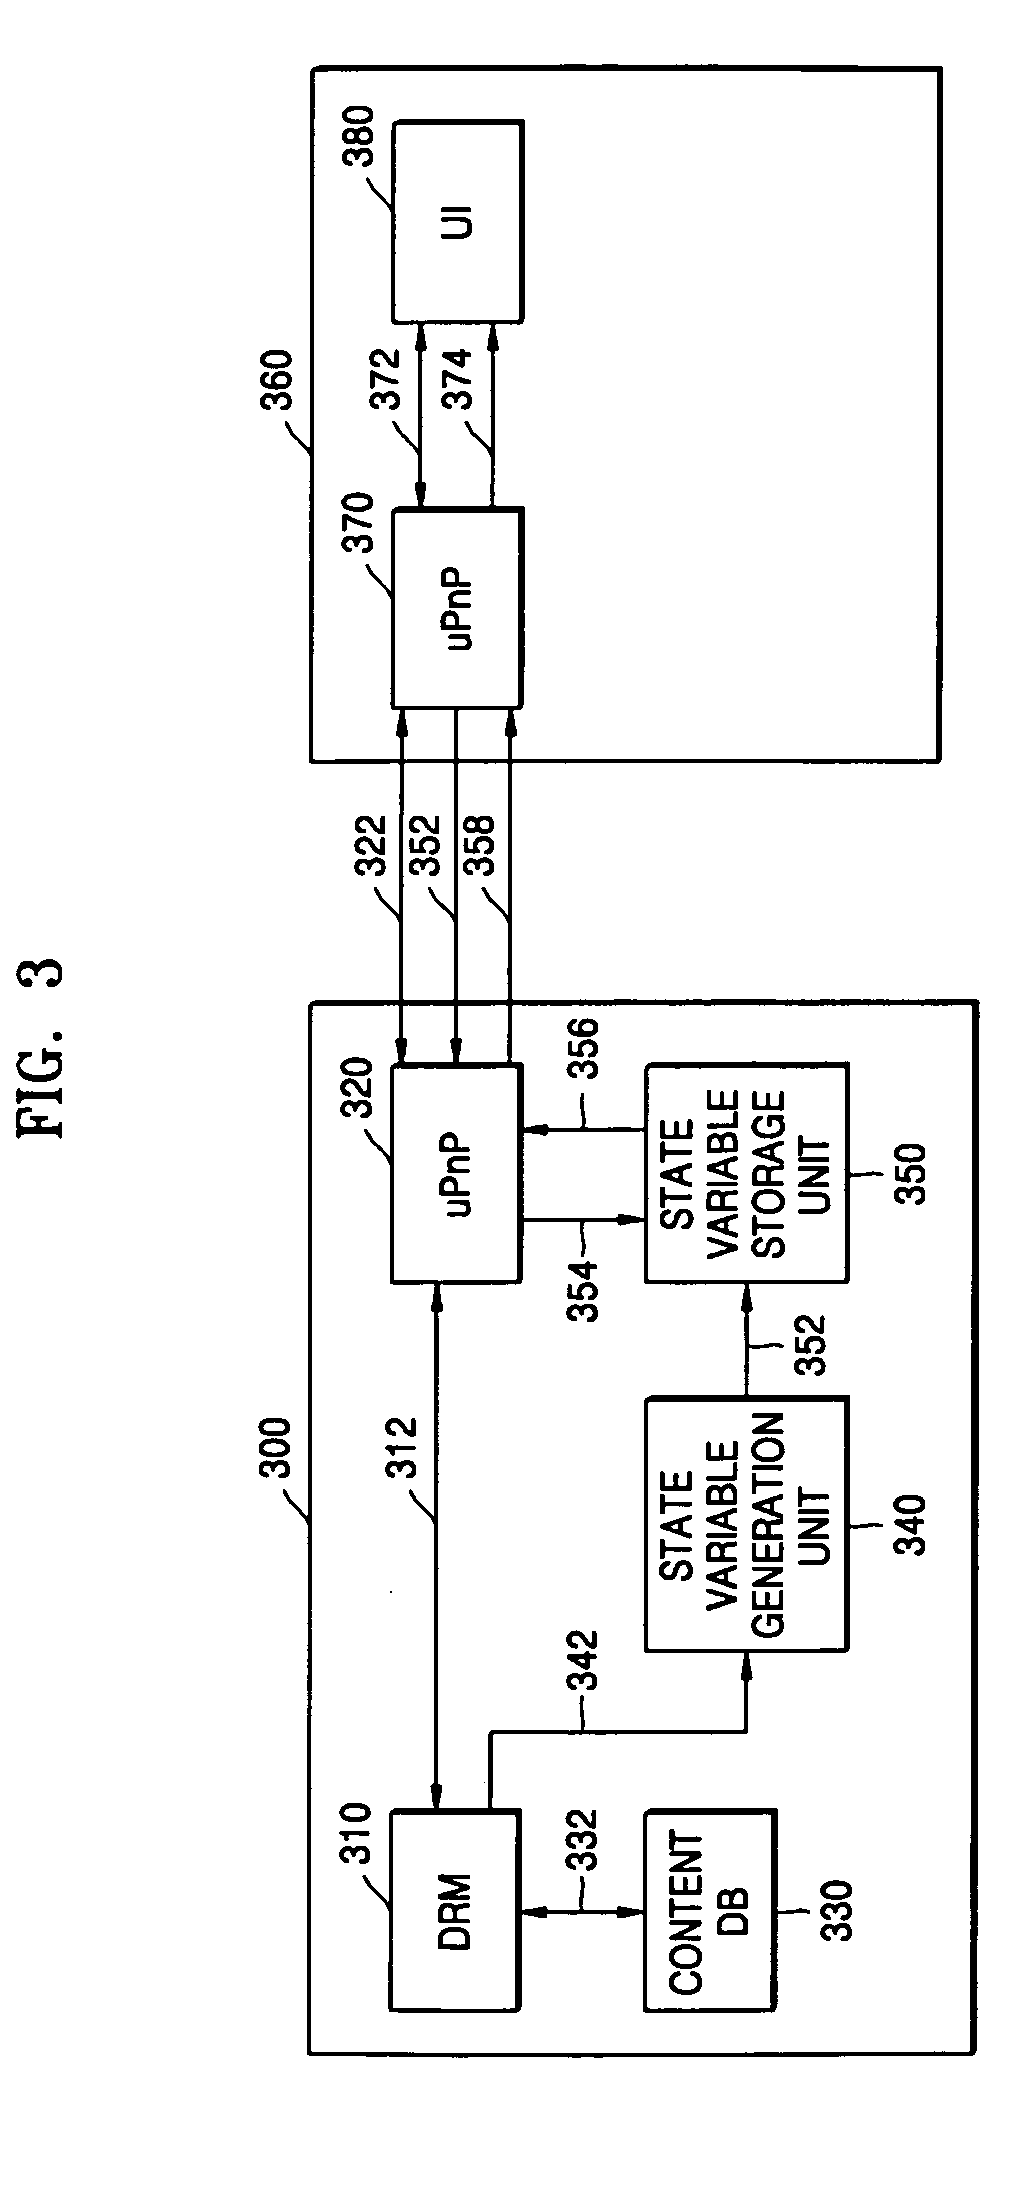 Apparatus and method for reporting operation state of digital rights management